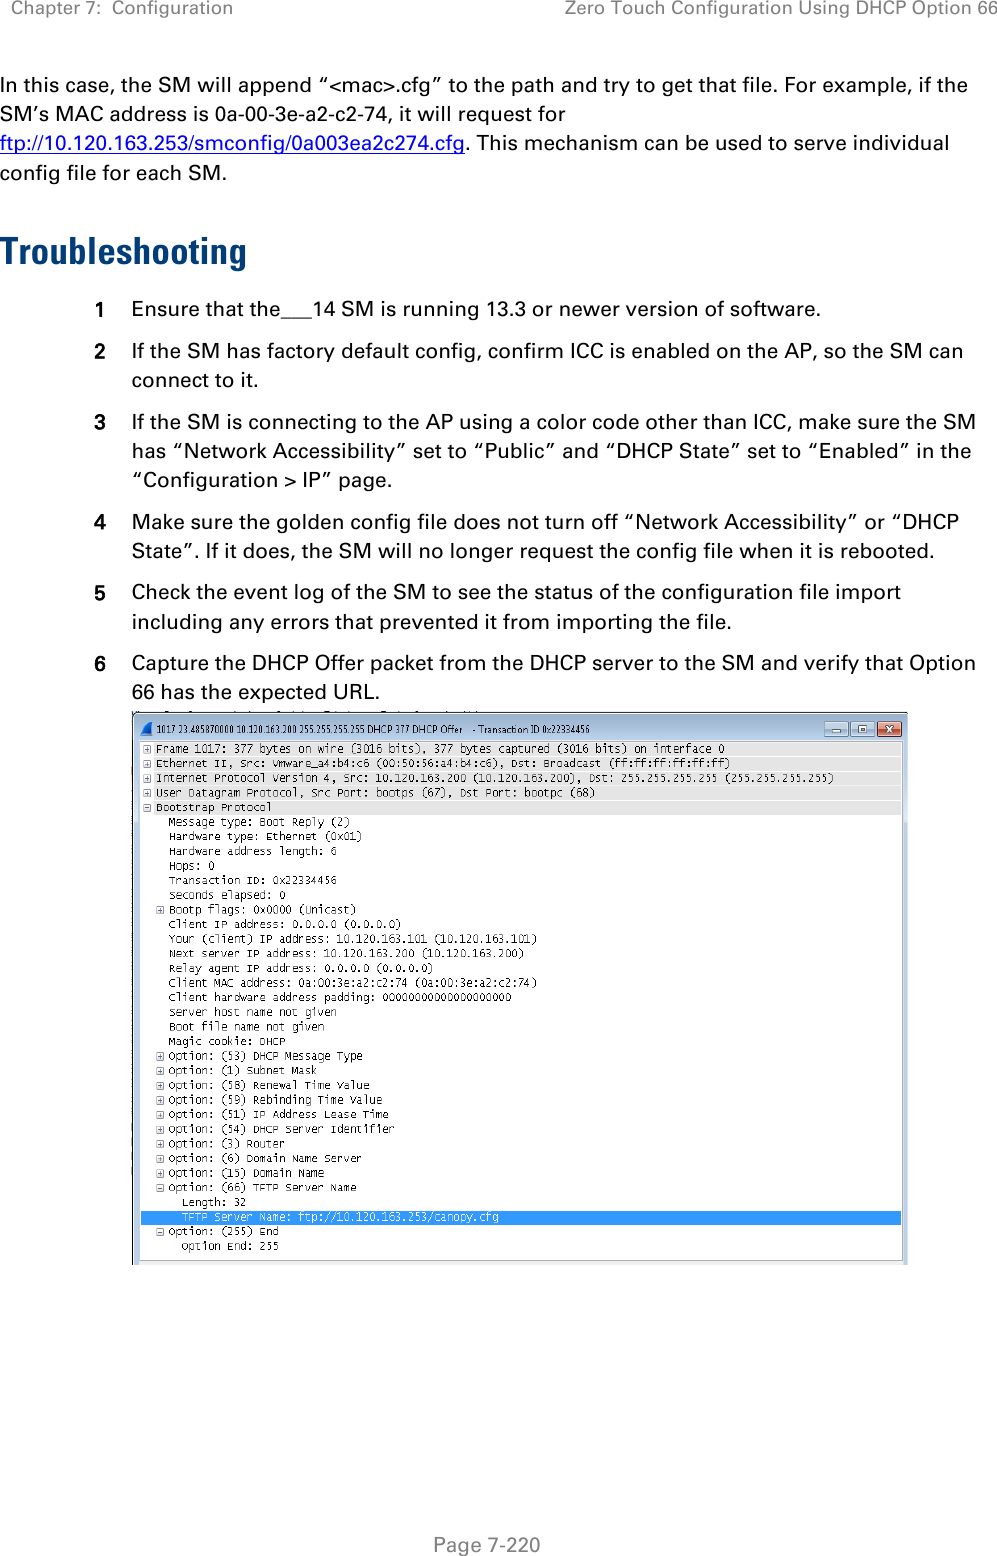 Chapter 7:  Configuration Zero Touch Configuration Using DHCP Option 66   Page 7-220 In this case, the SM will append “&lt;mac&gt;.cfg” to the path and try to get that file. For example, if the SM’s MAC address is 0a-00-3e-a2-c2-74, it will request for ftp://10.120.163.253/smconfig/0a003ea2c274.cfg. This mechanism can be used to serve individual config file for each SM.  Troubleshooting 1 Ensure that the___14 SM is running 13.3 or newer version of software. 2 If the SM has factory default config, confirm ICC is enabled on the AP, so the SM can connect to it.  3 If the SM is connecting to the AP using a color code other than ICC, make sure the SM has “Network Accessibility” set to “Public” and “DHCP State” set to “Enabled” in the “Configuration &gt; IP” page. 4 Make sure the golden config file does not turn off “Network Accessibility” or “DHCP State”. If it does, the SM will no longer request the config file when it is rebooted. 5 Check the event log of the SM to see the status of the configuration file import including any errors that prevented it from importing the file. 6 Capture the DHCP Offer packet from the DHCP server to the SM and verify that Option 66 has the expected URL.   